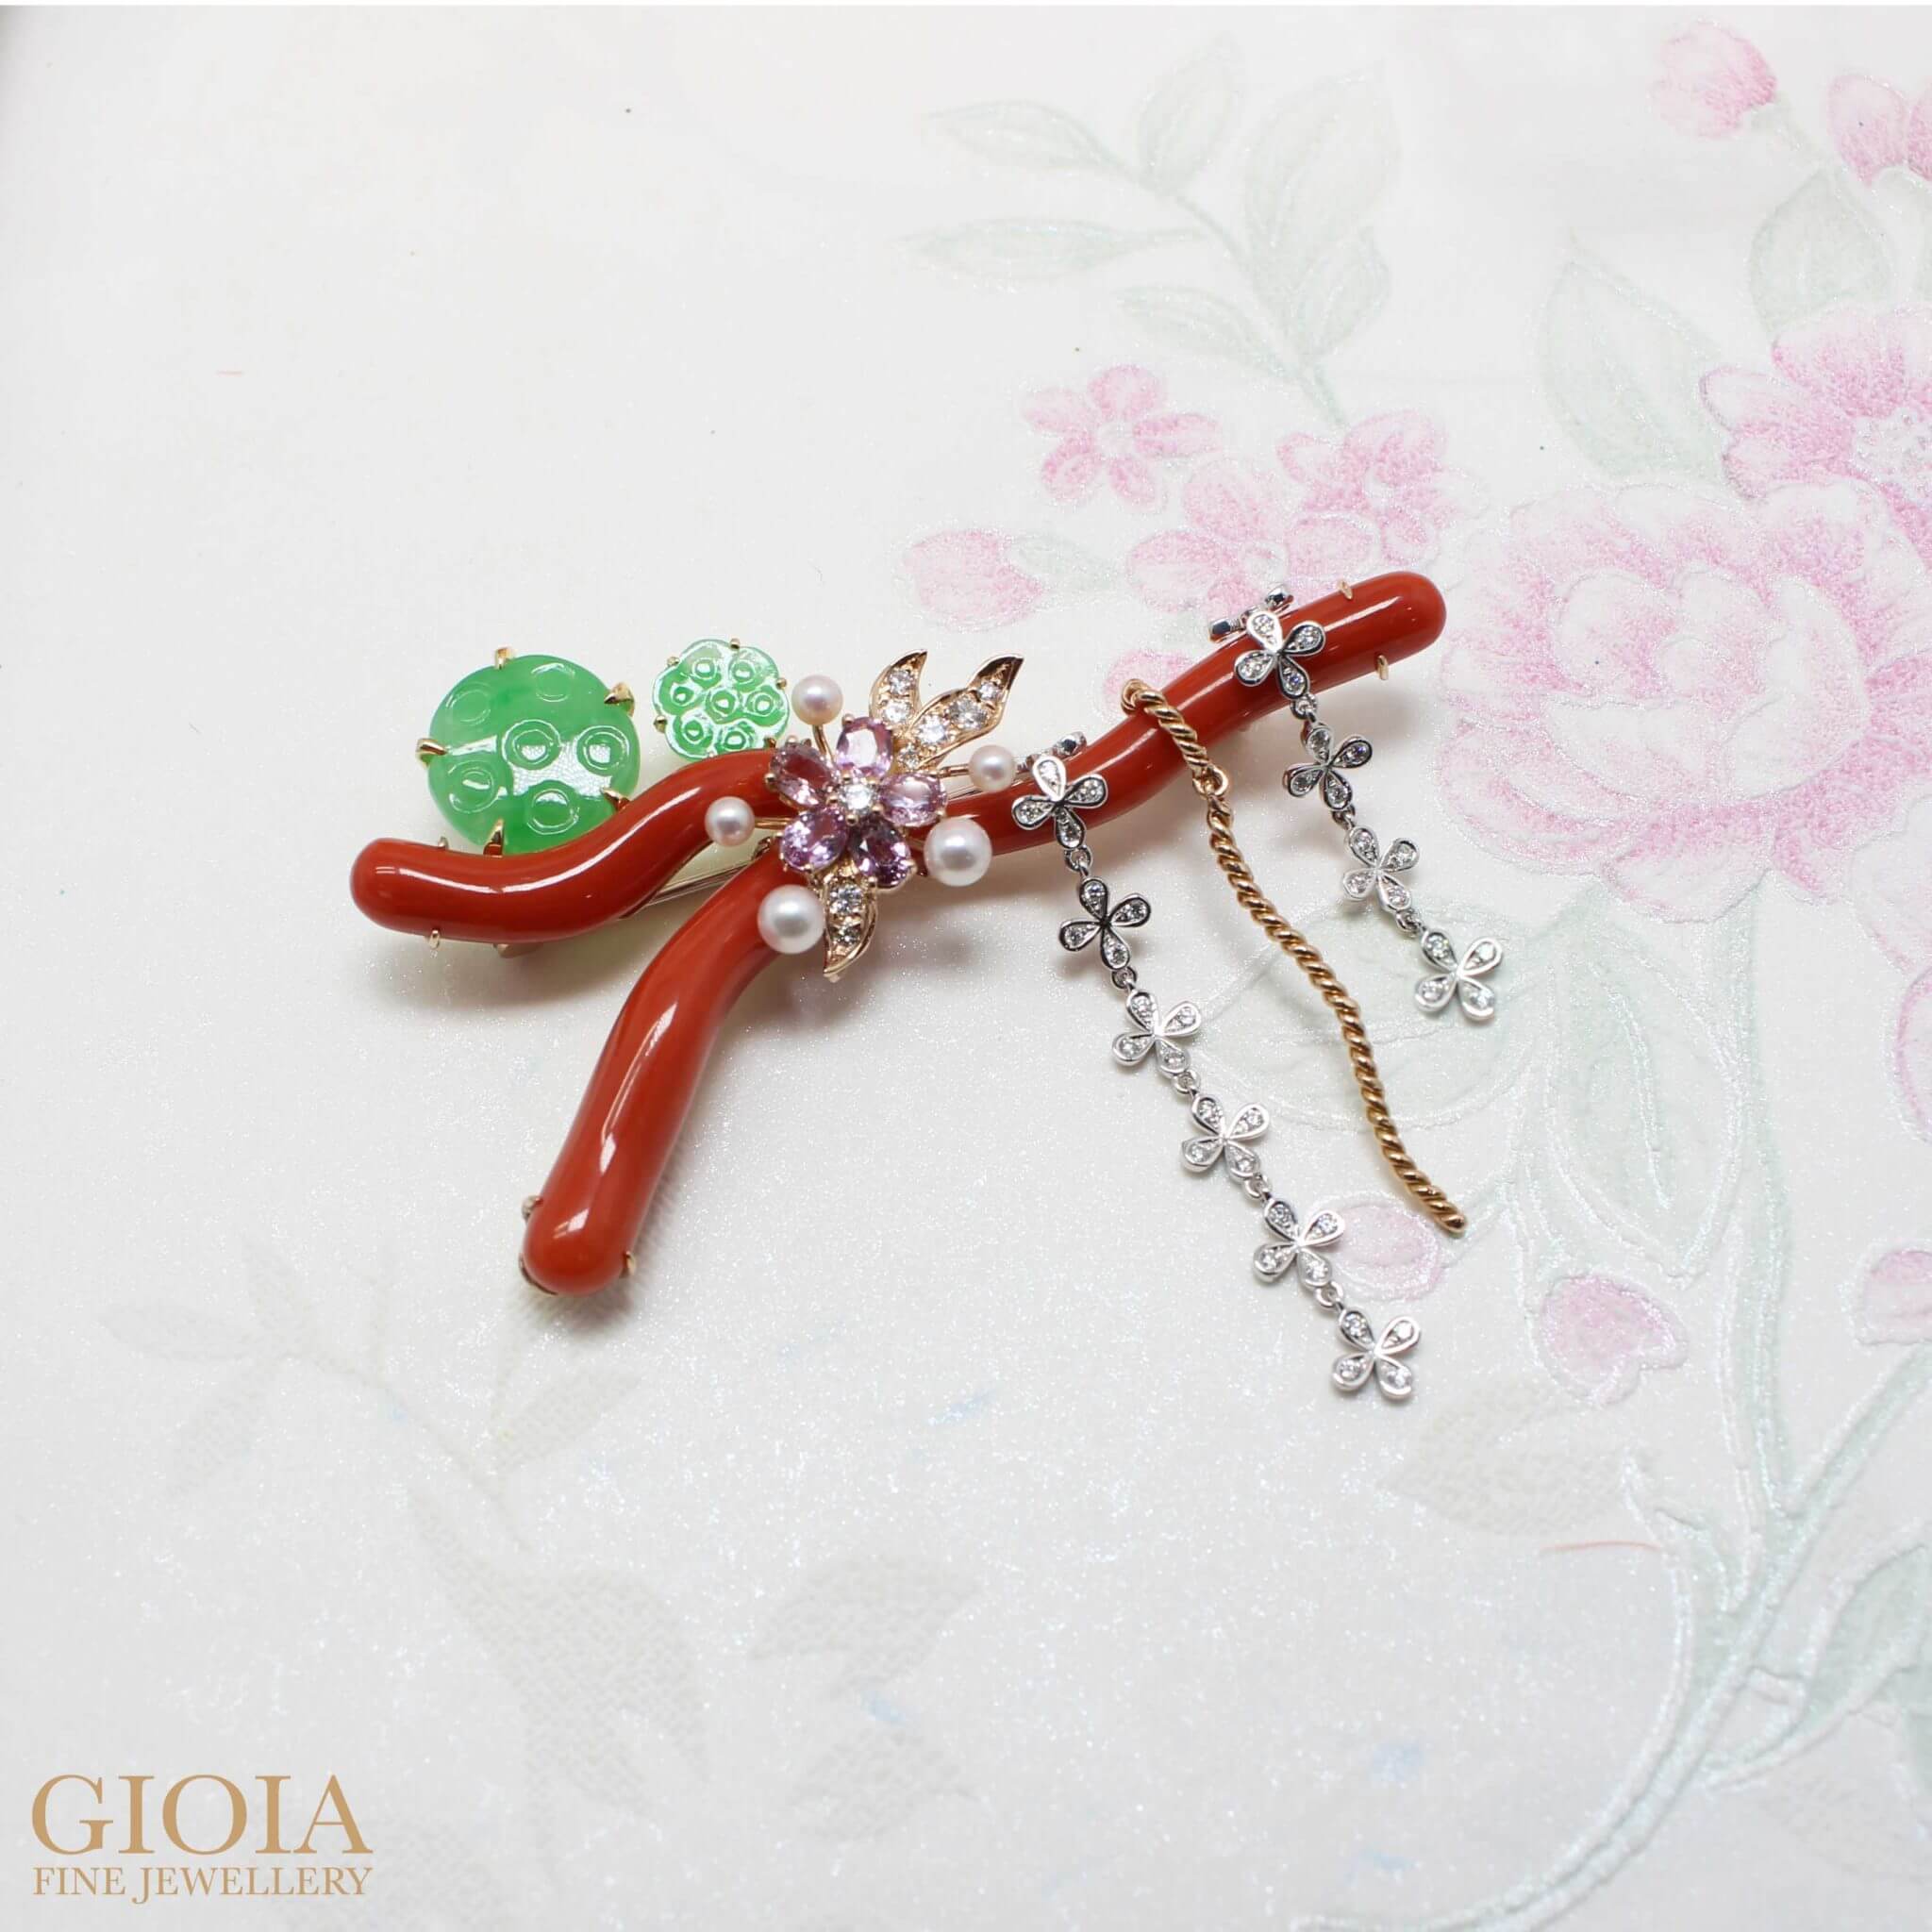 Customised Brooch Jewellery custom set with coral, jade, coloured gemstones and akoya pearls customised for Chinese New Year Jewellery - Oriental Bespoke Jewellery with Private Jeweller in Singapore, redesign existing jewellery to fine jewellery